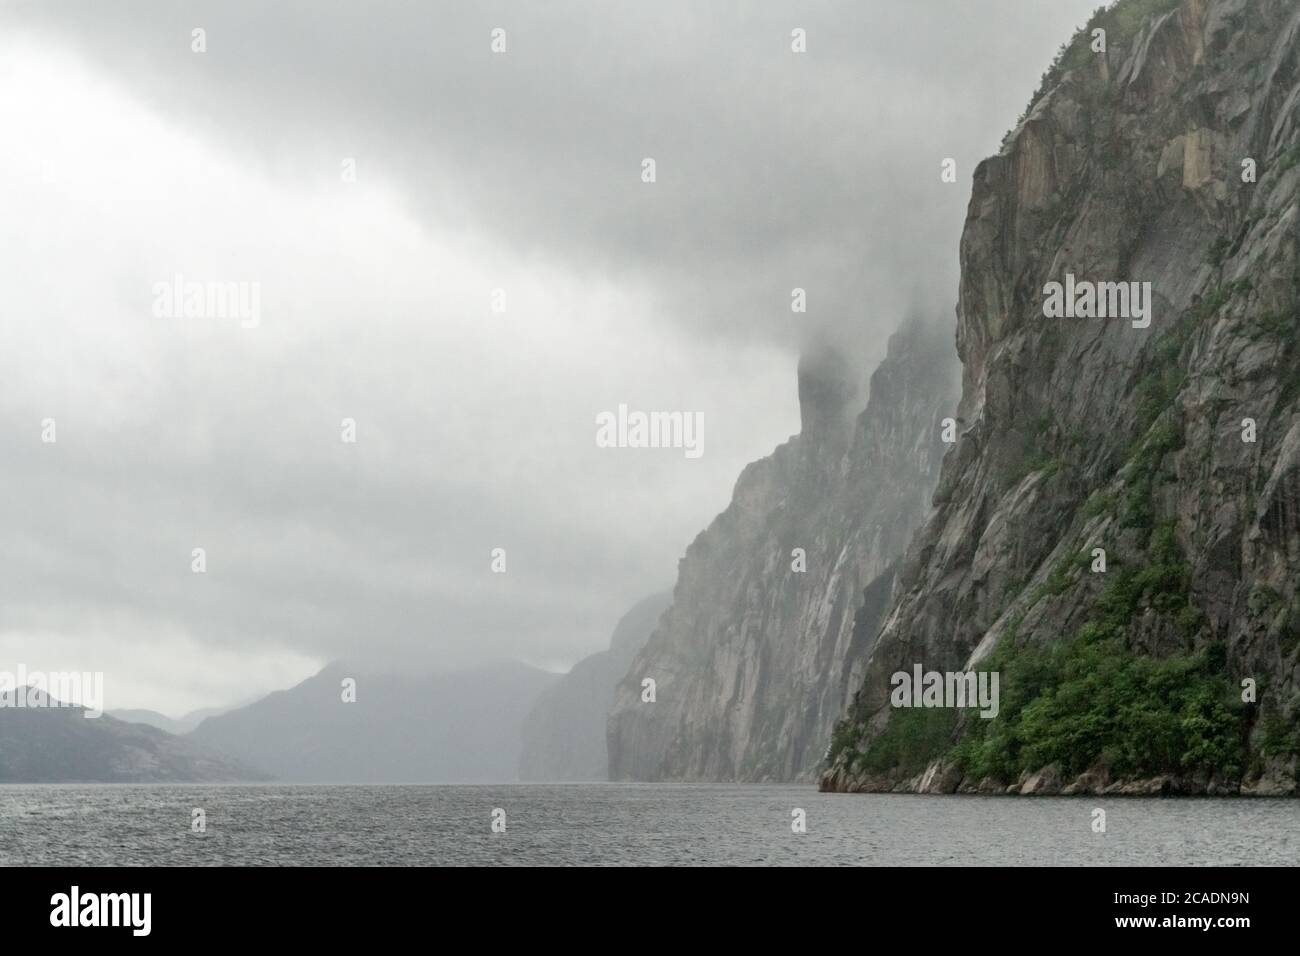 Astound - Weather, rock, and water combine to impress. Lysefjord, Forsand, Norway Stock Photo